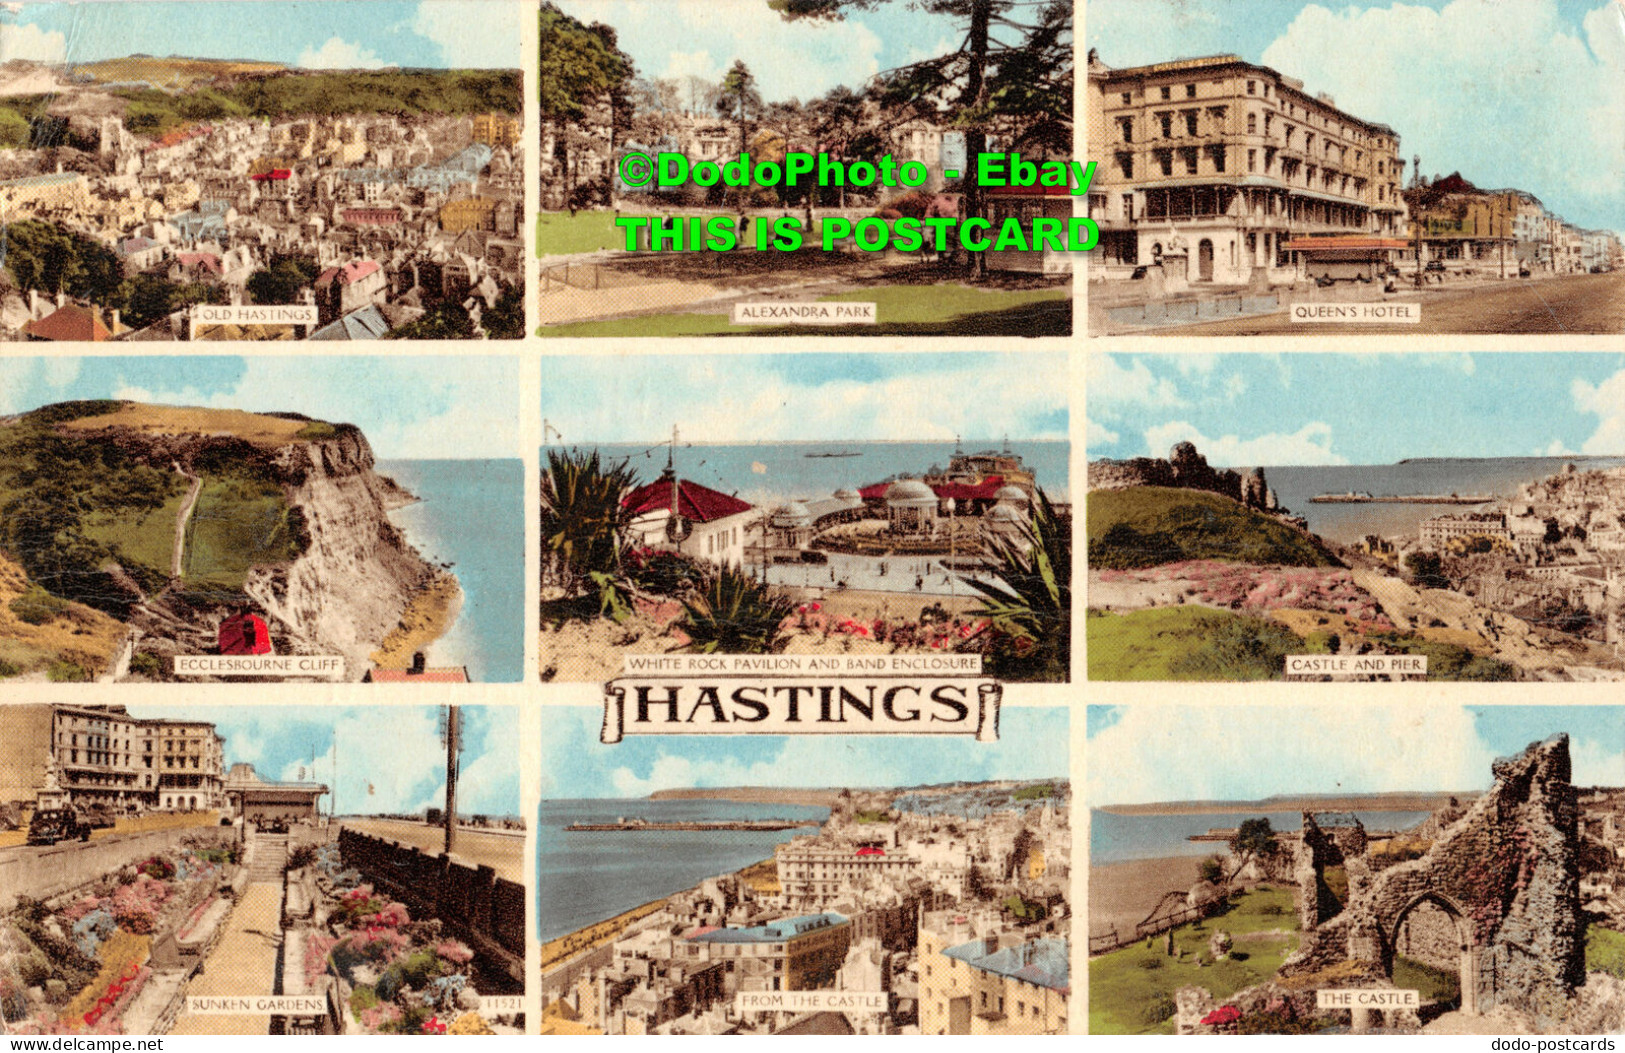 R437479 Hastings. Alexandra Park. Castle And Pier. Norman. Shoesmith And Etherid - Mondo